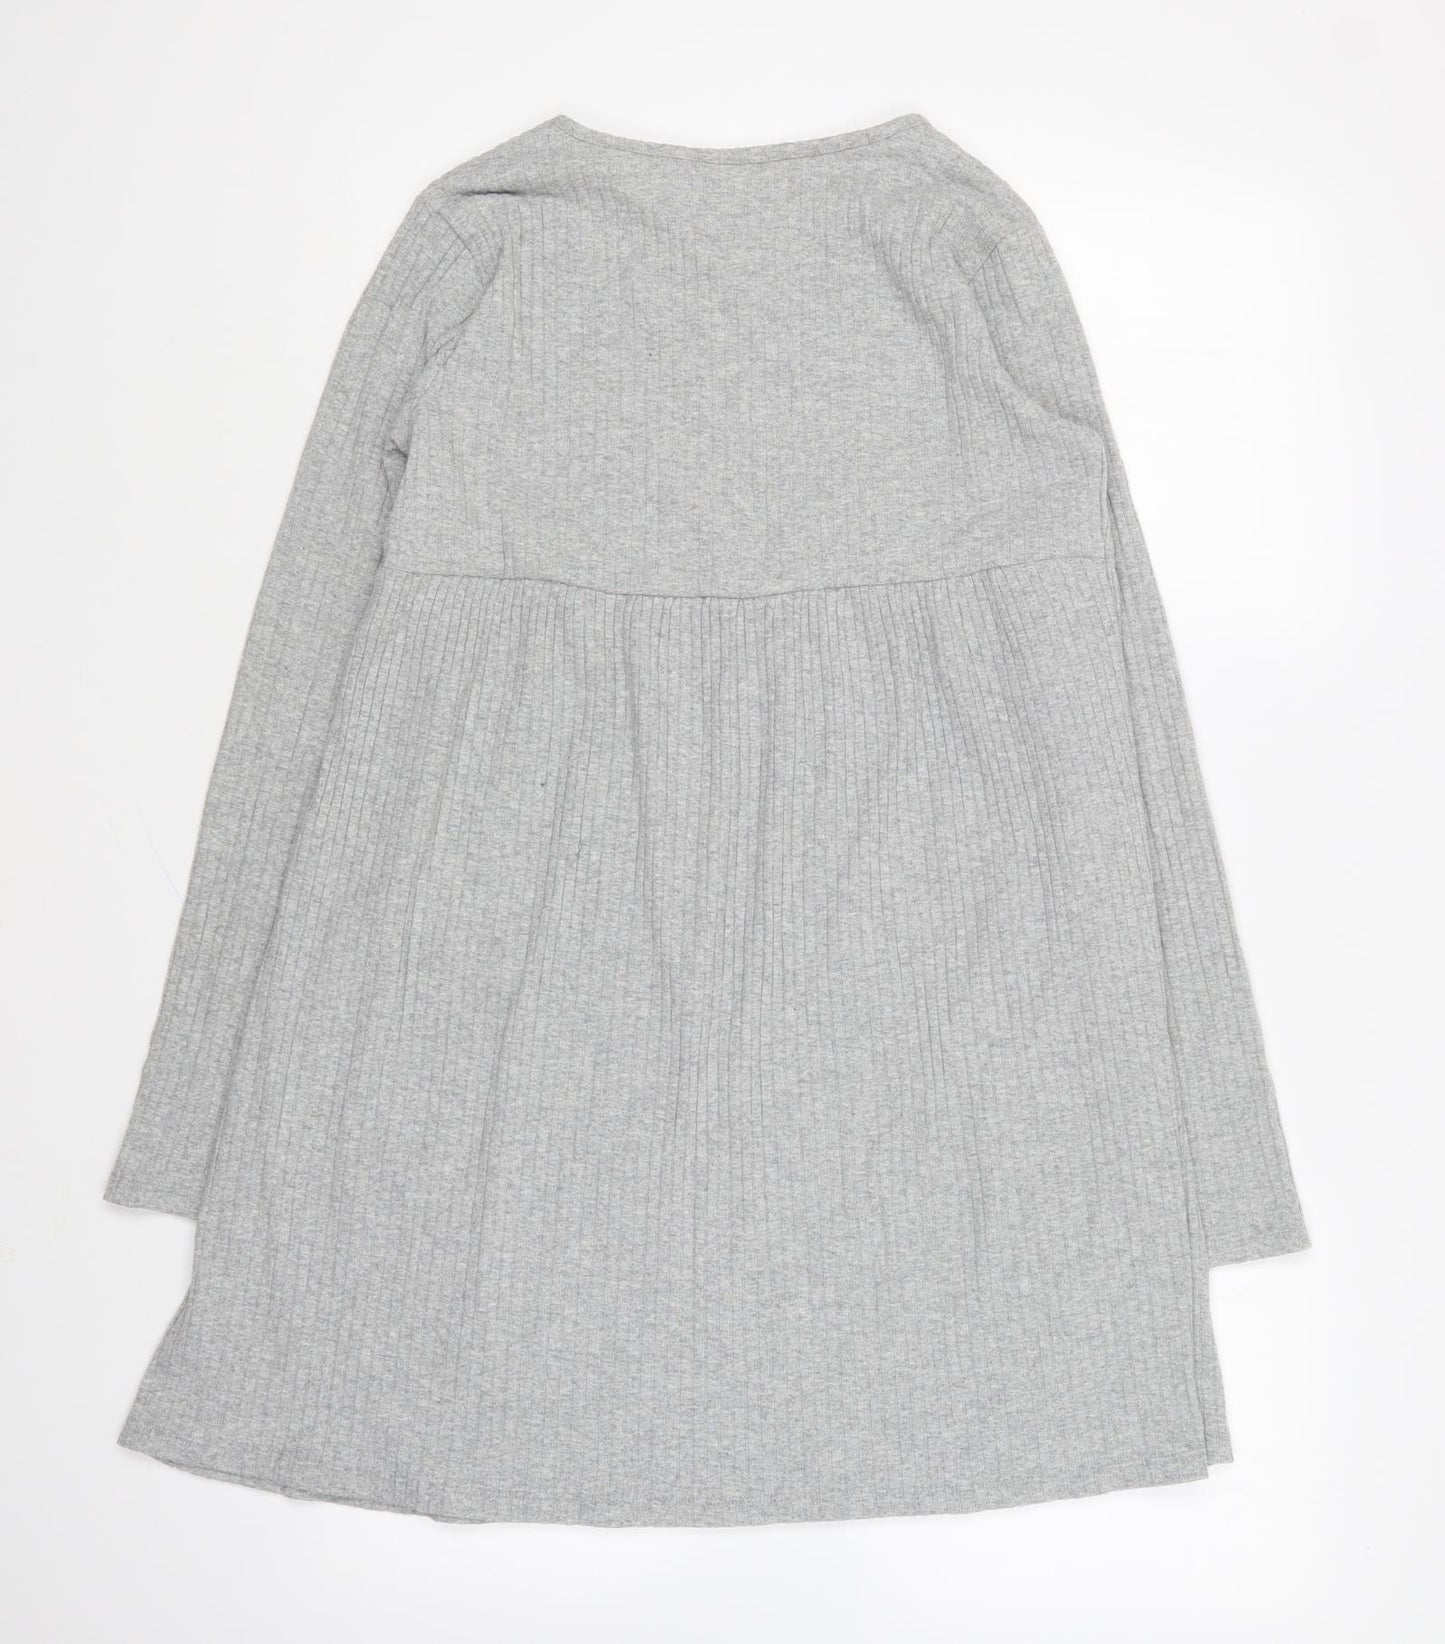 PEP&CO Girls Grey Polyester Jumper Dress Size 12-13 Years Round Neck Pullover